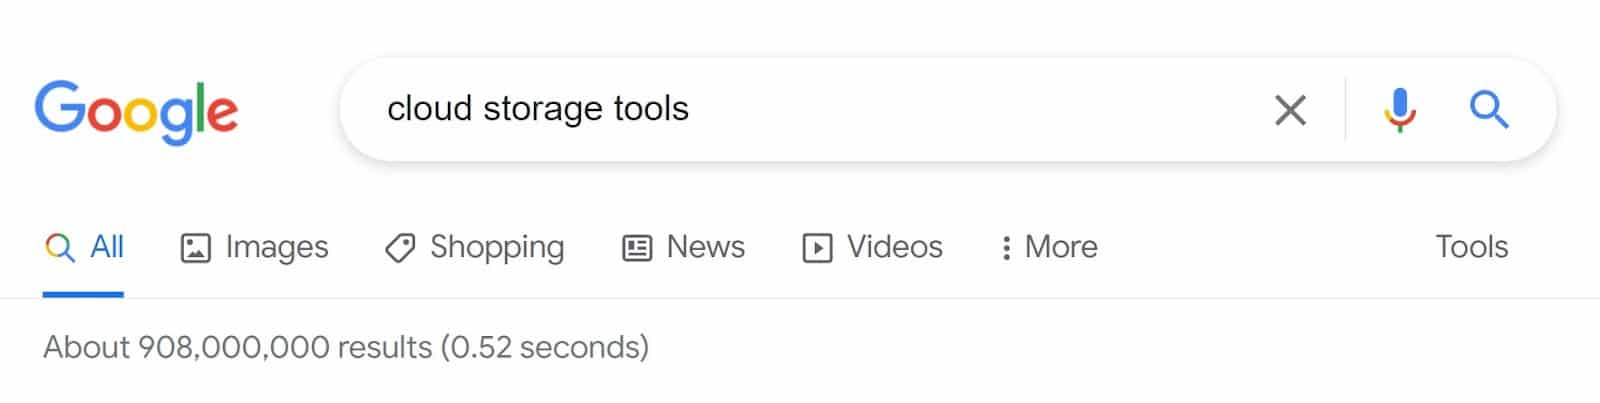 Results for the Google search "cloud storage tools"